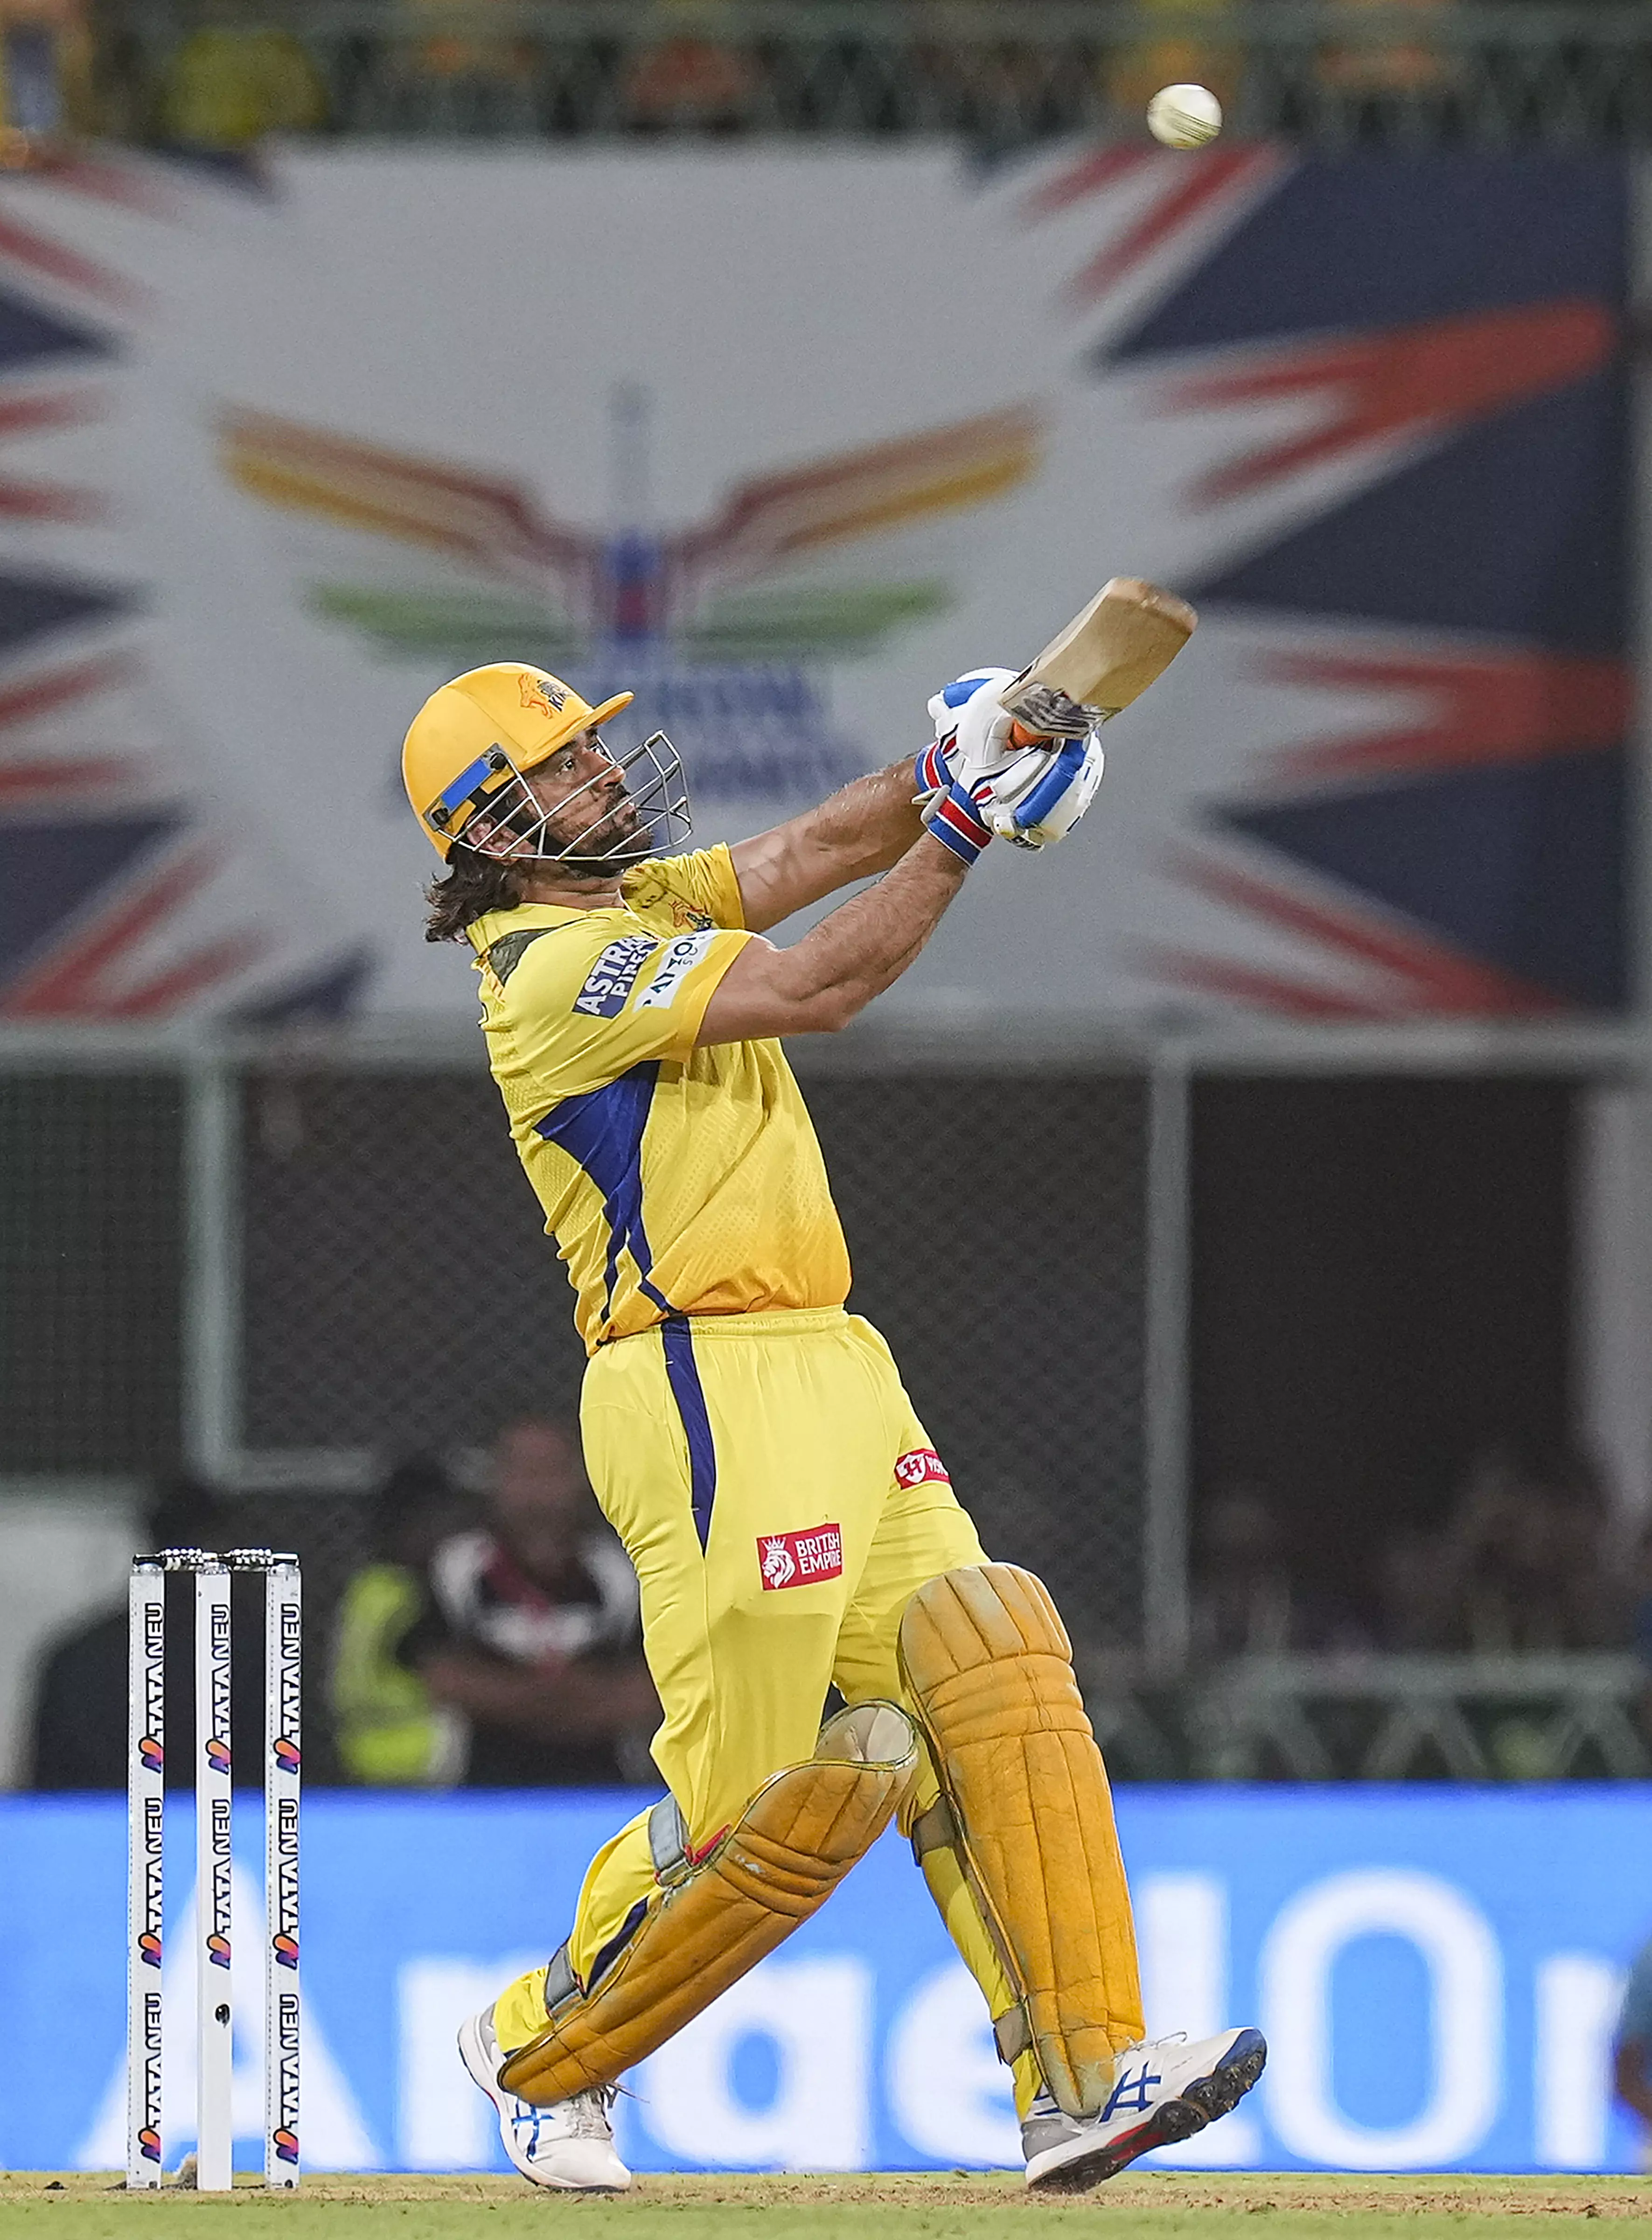 CSK’s ‘heartbeat’ owning that space at innings end: Coach Fleming on inspirational Dhoni